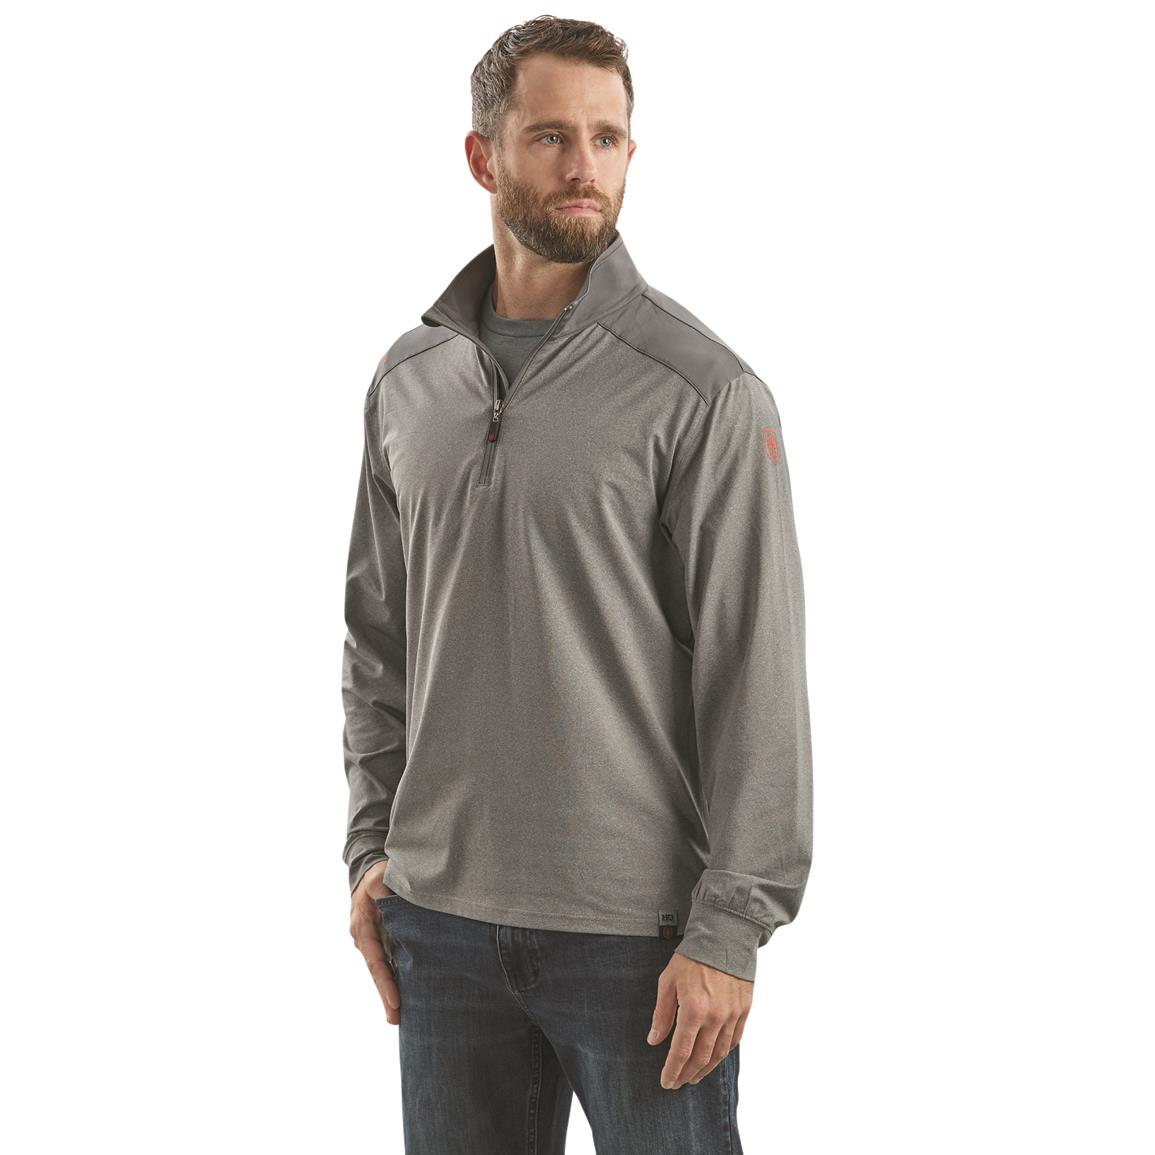 HQ ISSUE + Warrior Poet Society CCW Half-zip Performance Pullover, Iron Gate